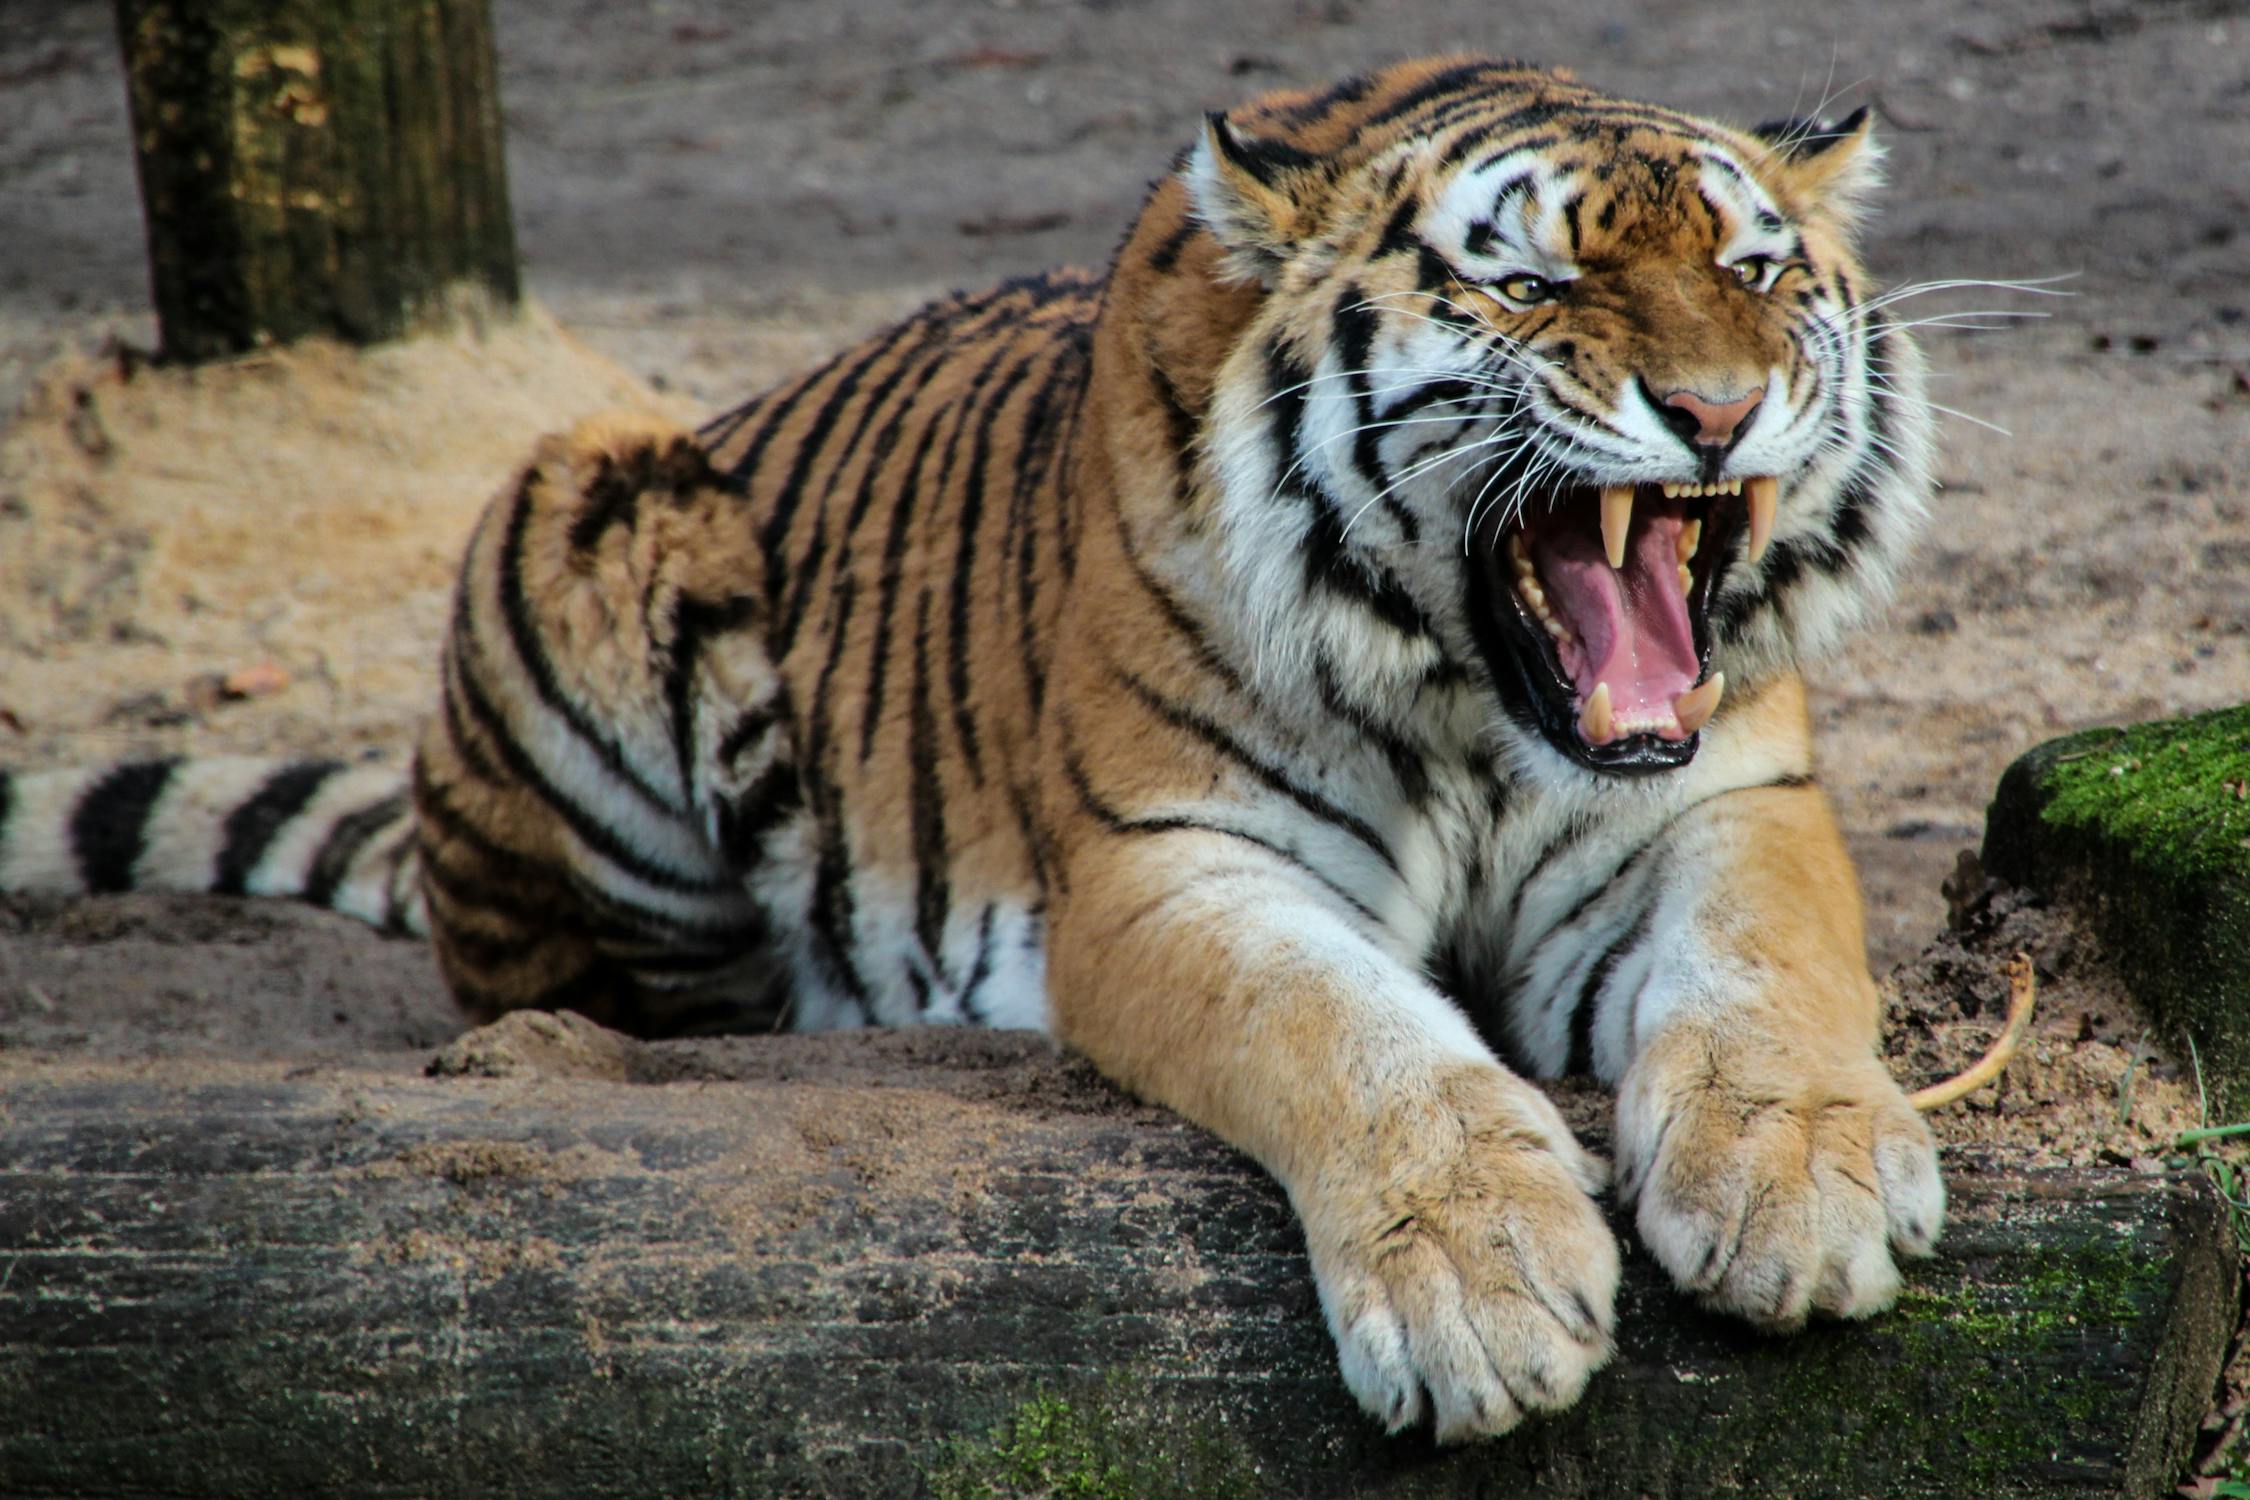 Tiger King Helps Build Support for Act to Ban Private Ownership of Big Cats